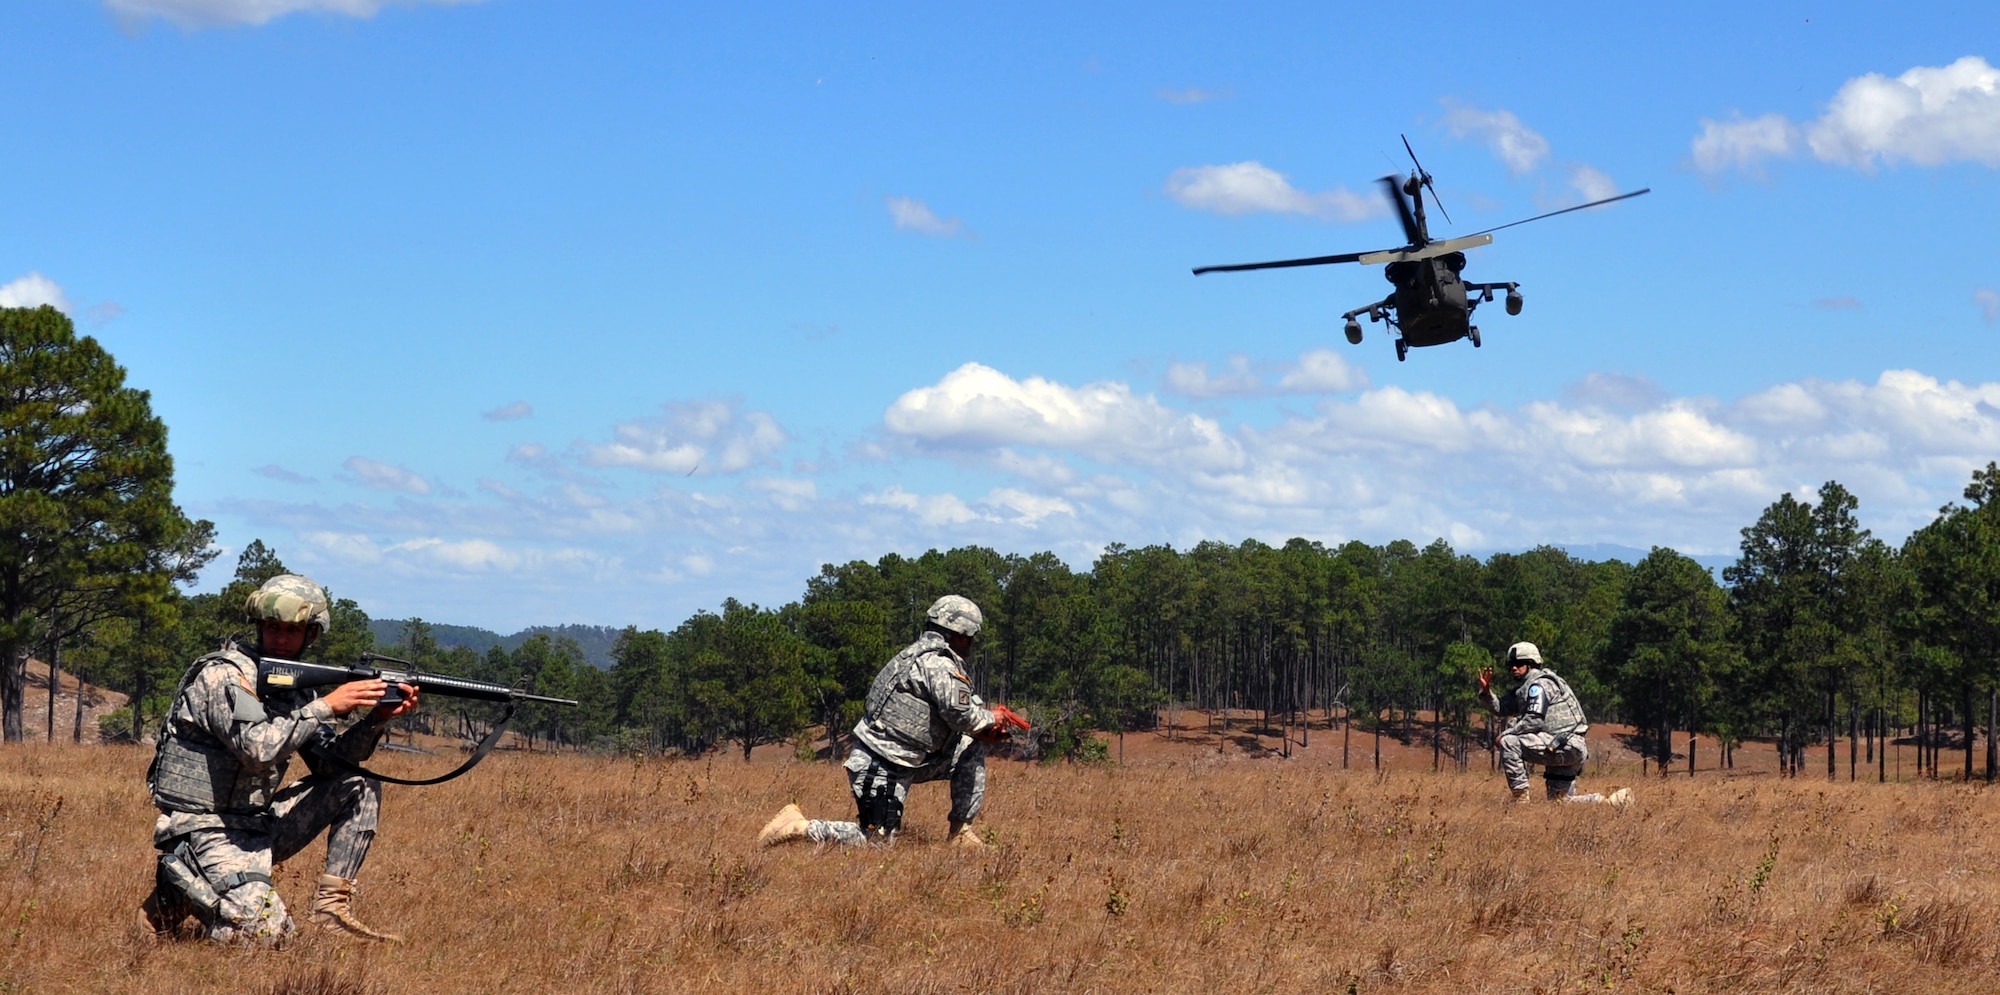 Members of Joint Task Force Bravo's Joint Security Forces Squadron provide security as a UH-60 Blackhawk helicopter lifts off during a personnel and downed aircraft recovery exercise in Honduras, Feb. 4, 2014.  The purpose of the exercise was to validate the unit's ability to immediately support a personnel recovery in the event of a downed aircraft. (U.S. Air Force photo by Capt. Zach Anderson)